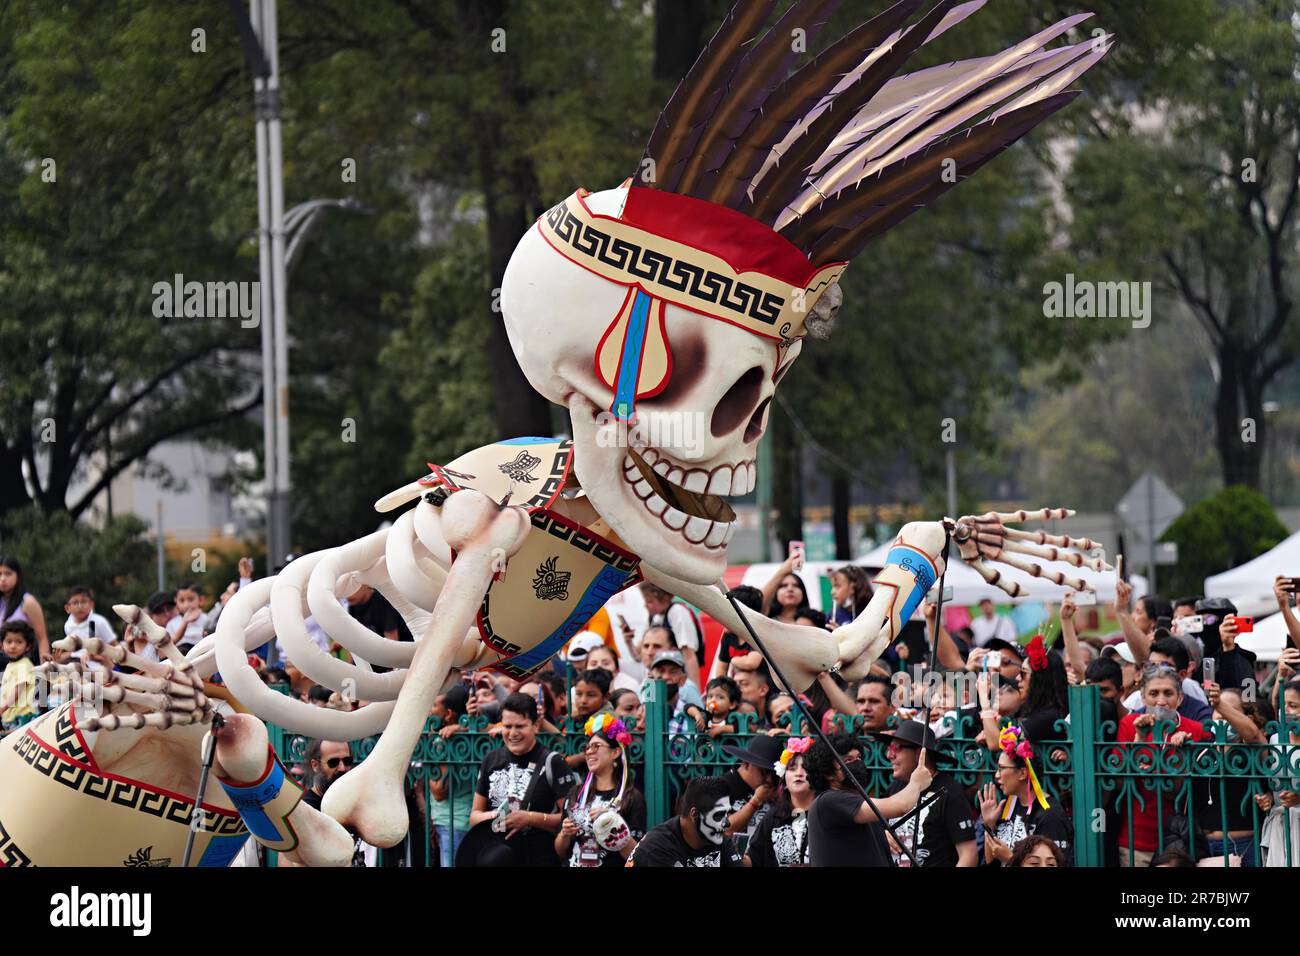 Giant skeletons process through the street during the Grand Parade of the Dead to celebrate Dia de los Muertos holiday on Paseo de la Reforma, October 29, 2022 in Mexico City, Mexico. Stock Photo